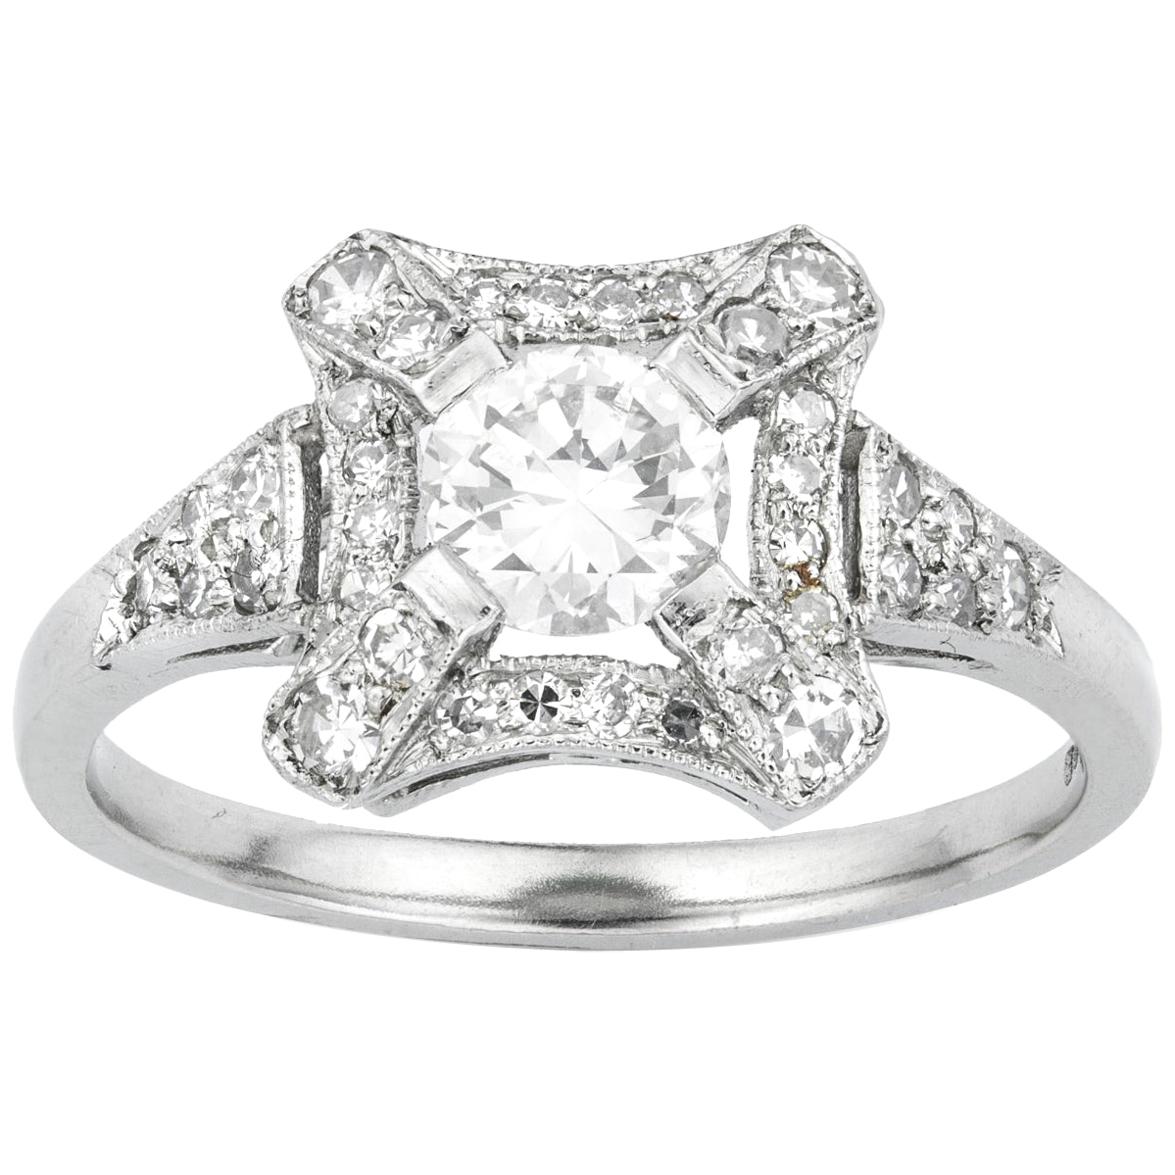 An Art Deco Style Square Cluster Diamond Ring